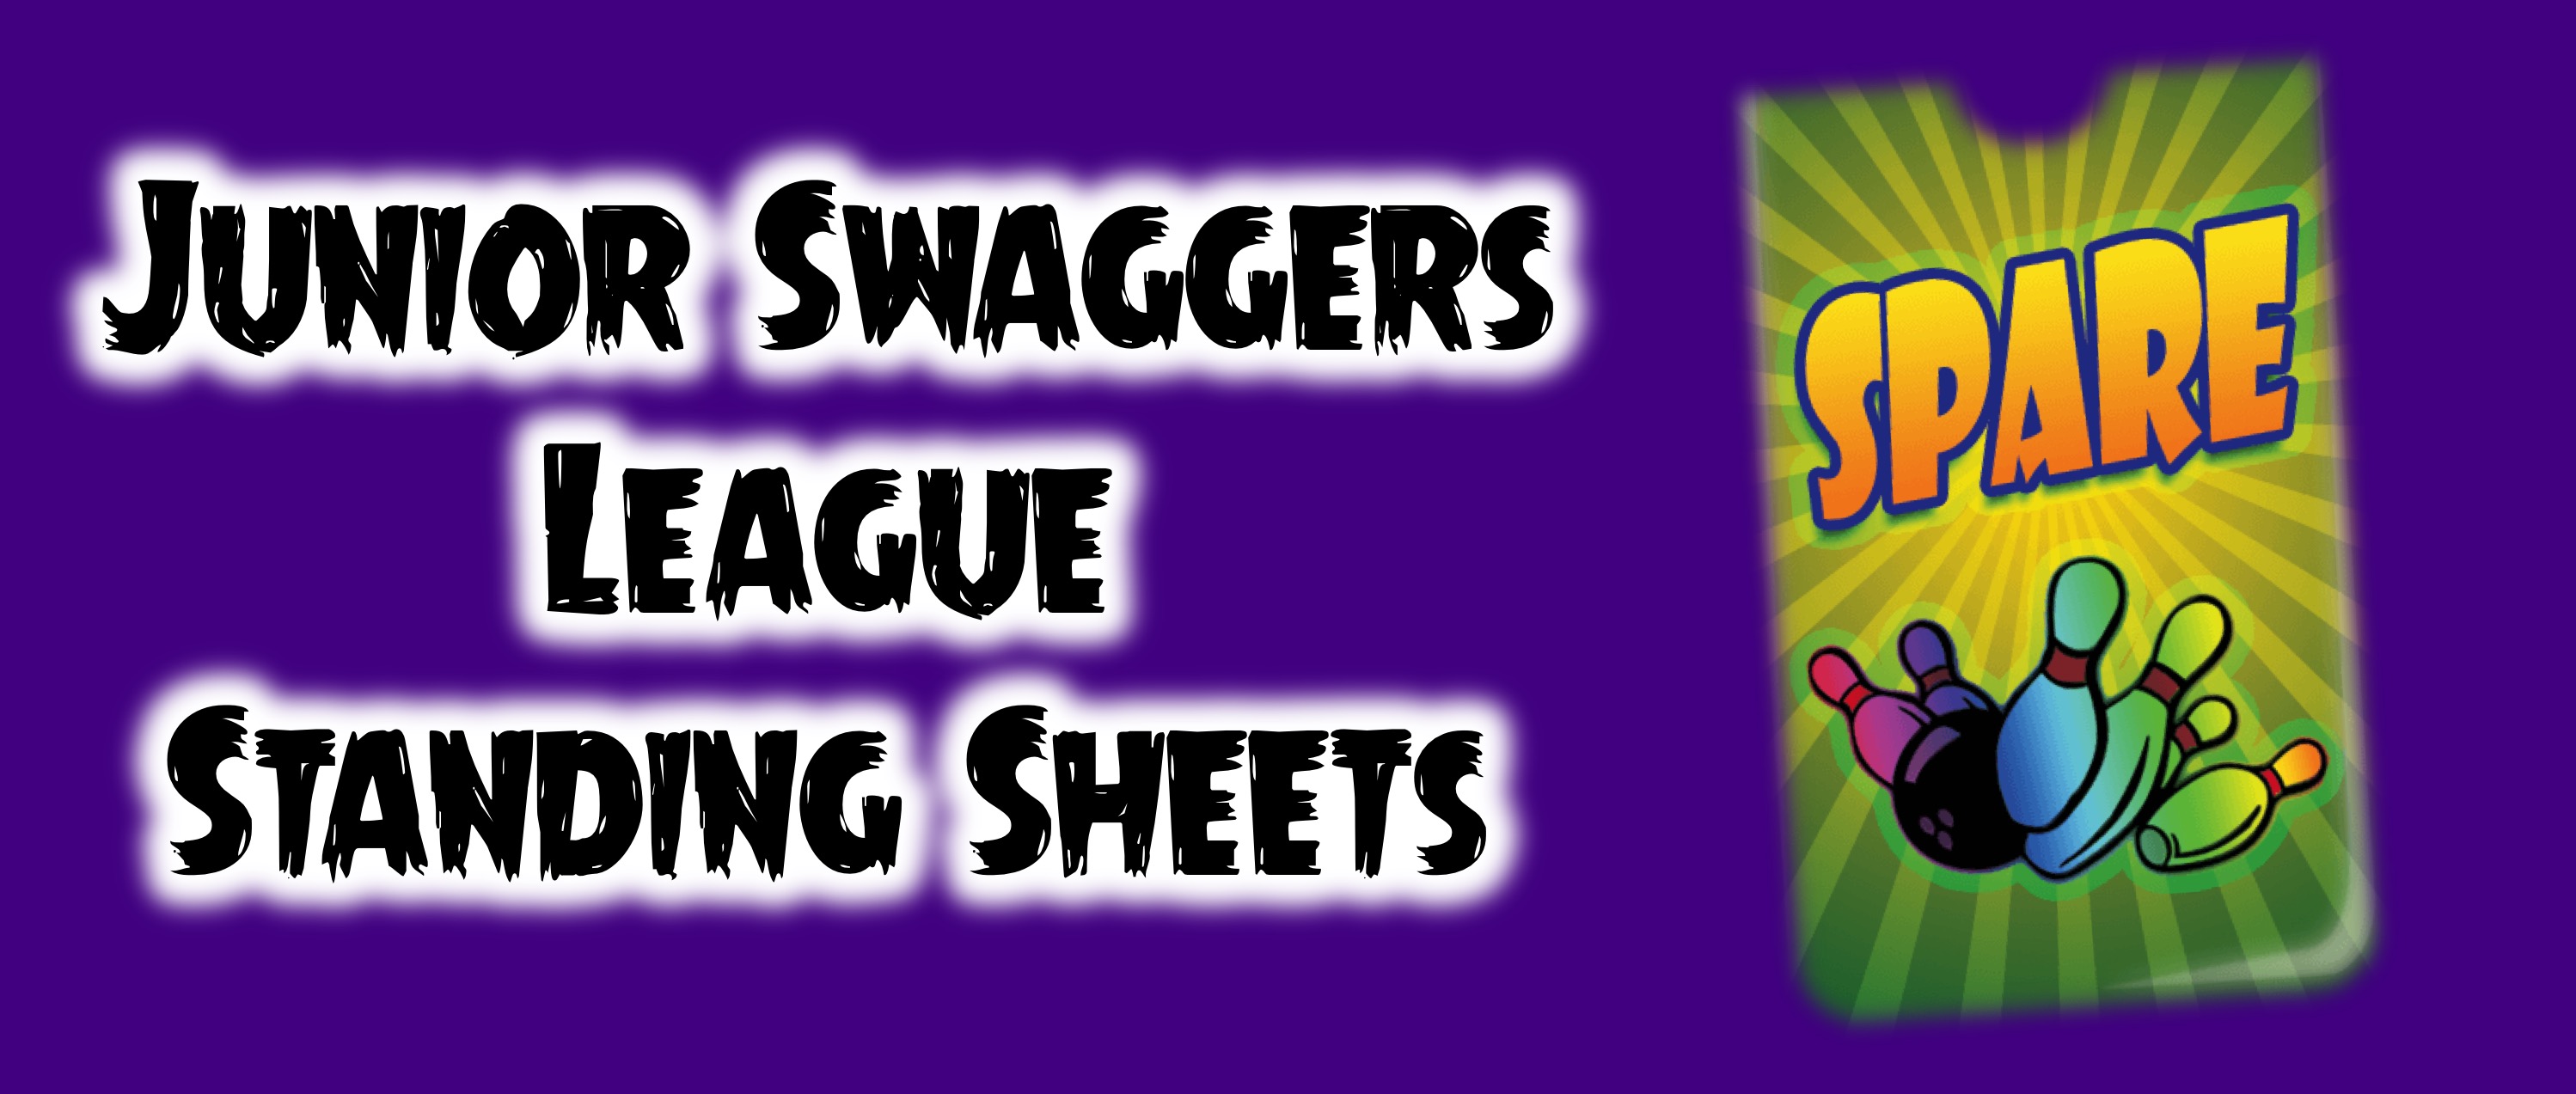 Junior Swaggers League Standing Sheets